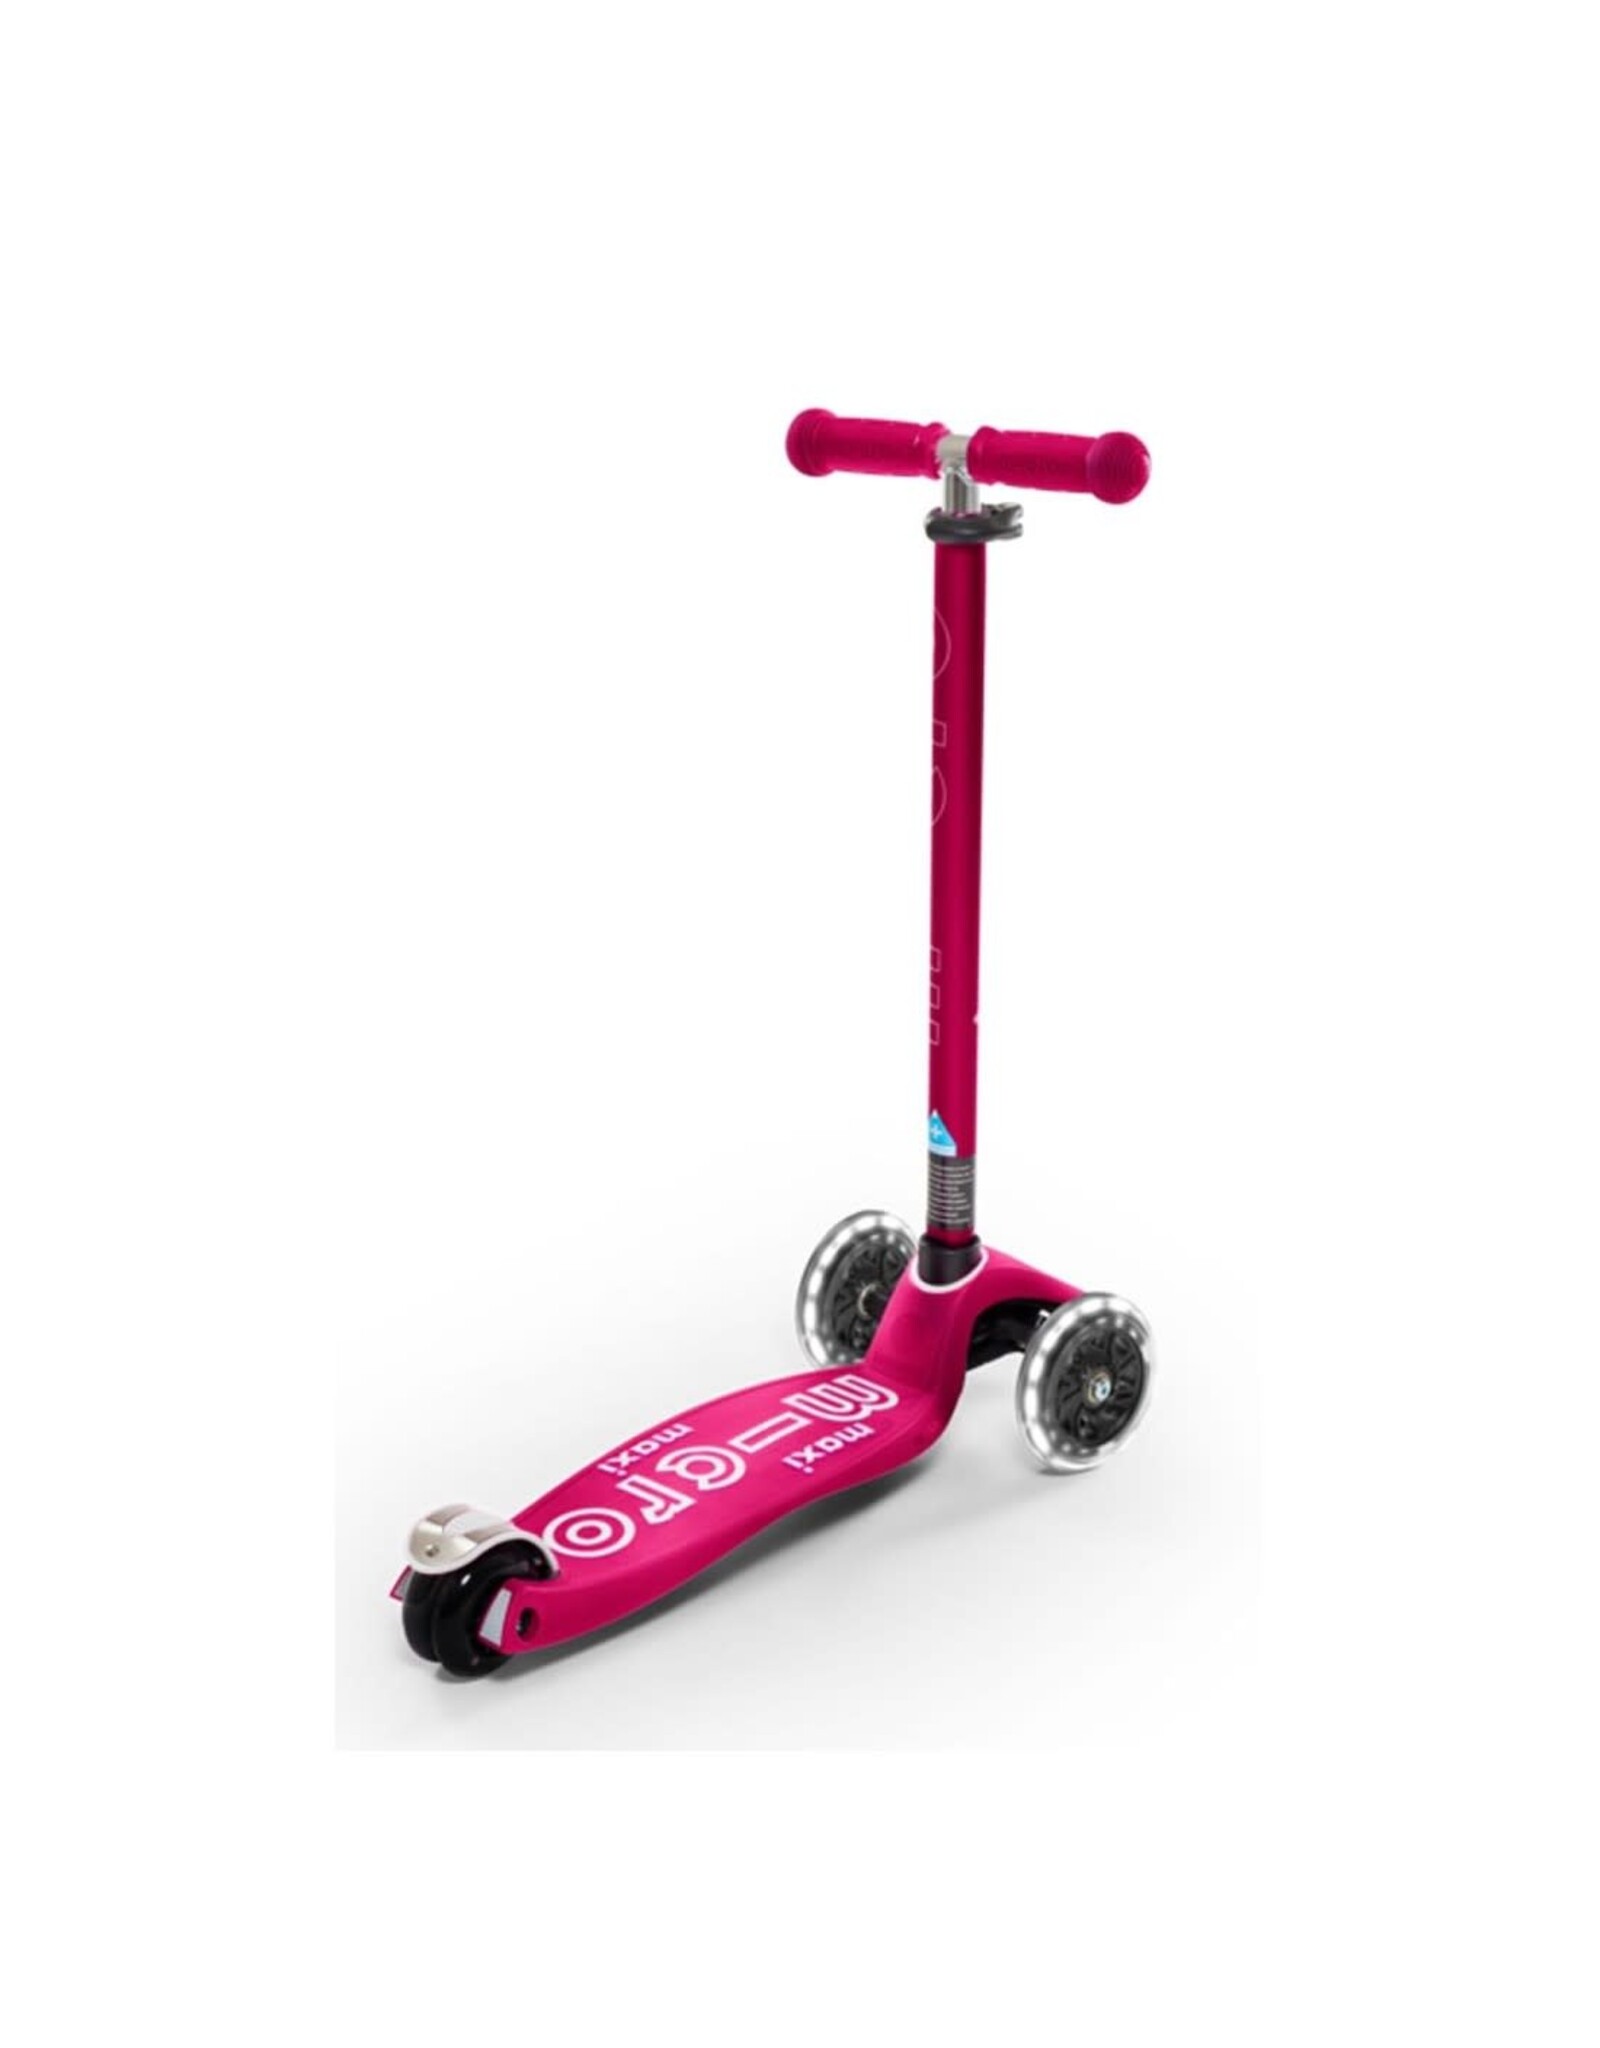 MICROSCOOTER PINK DELUXE LED MAXI